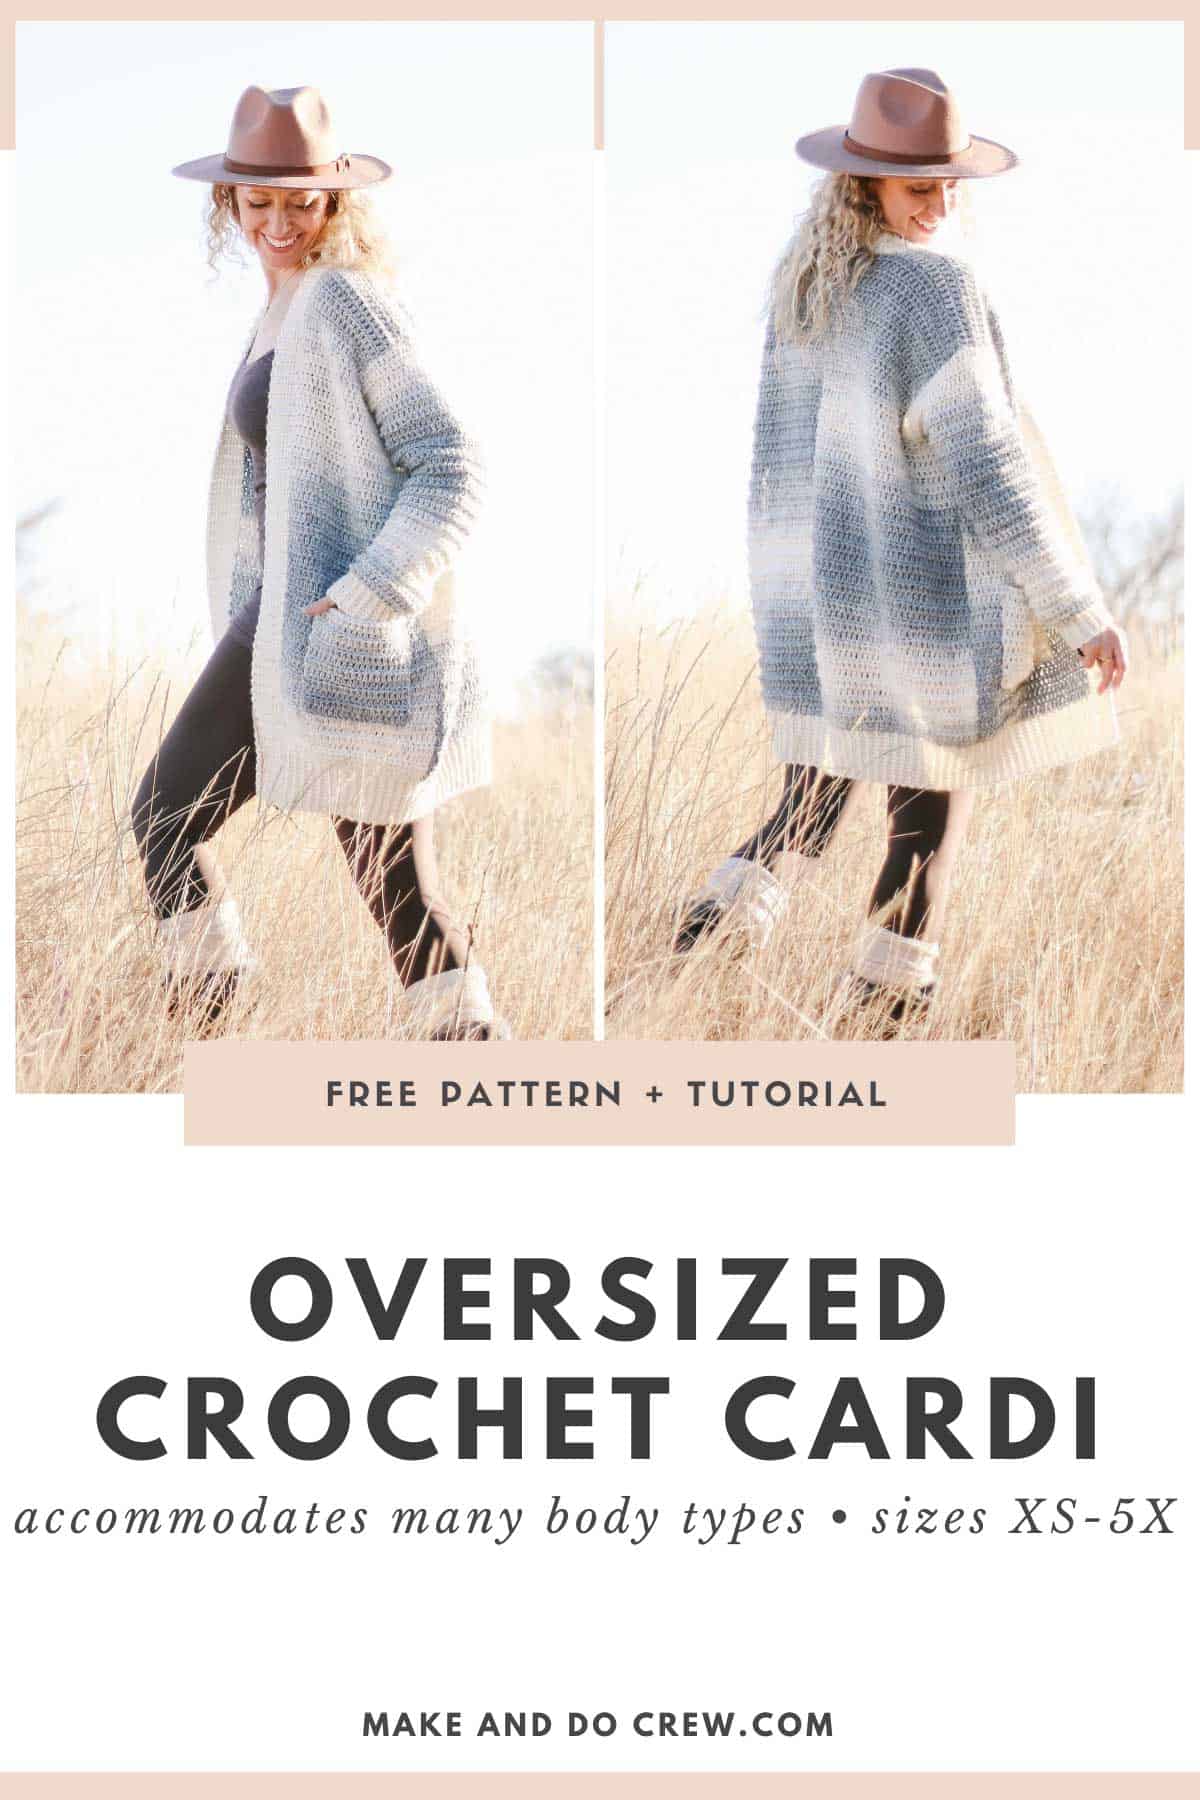 This image shows two pictures. They are of a woman wearing a gray and white ombre long crochet cardigan. In one picture, her hands are in the pockets of the sweater. In the other picture, her hands are by her side and she is displaying the back of the long cardigan.